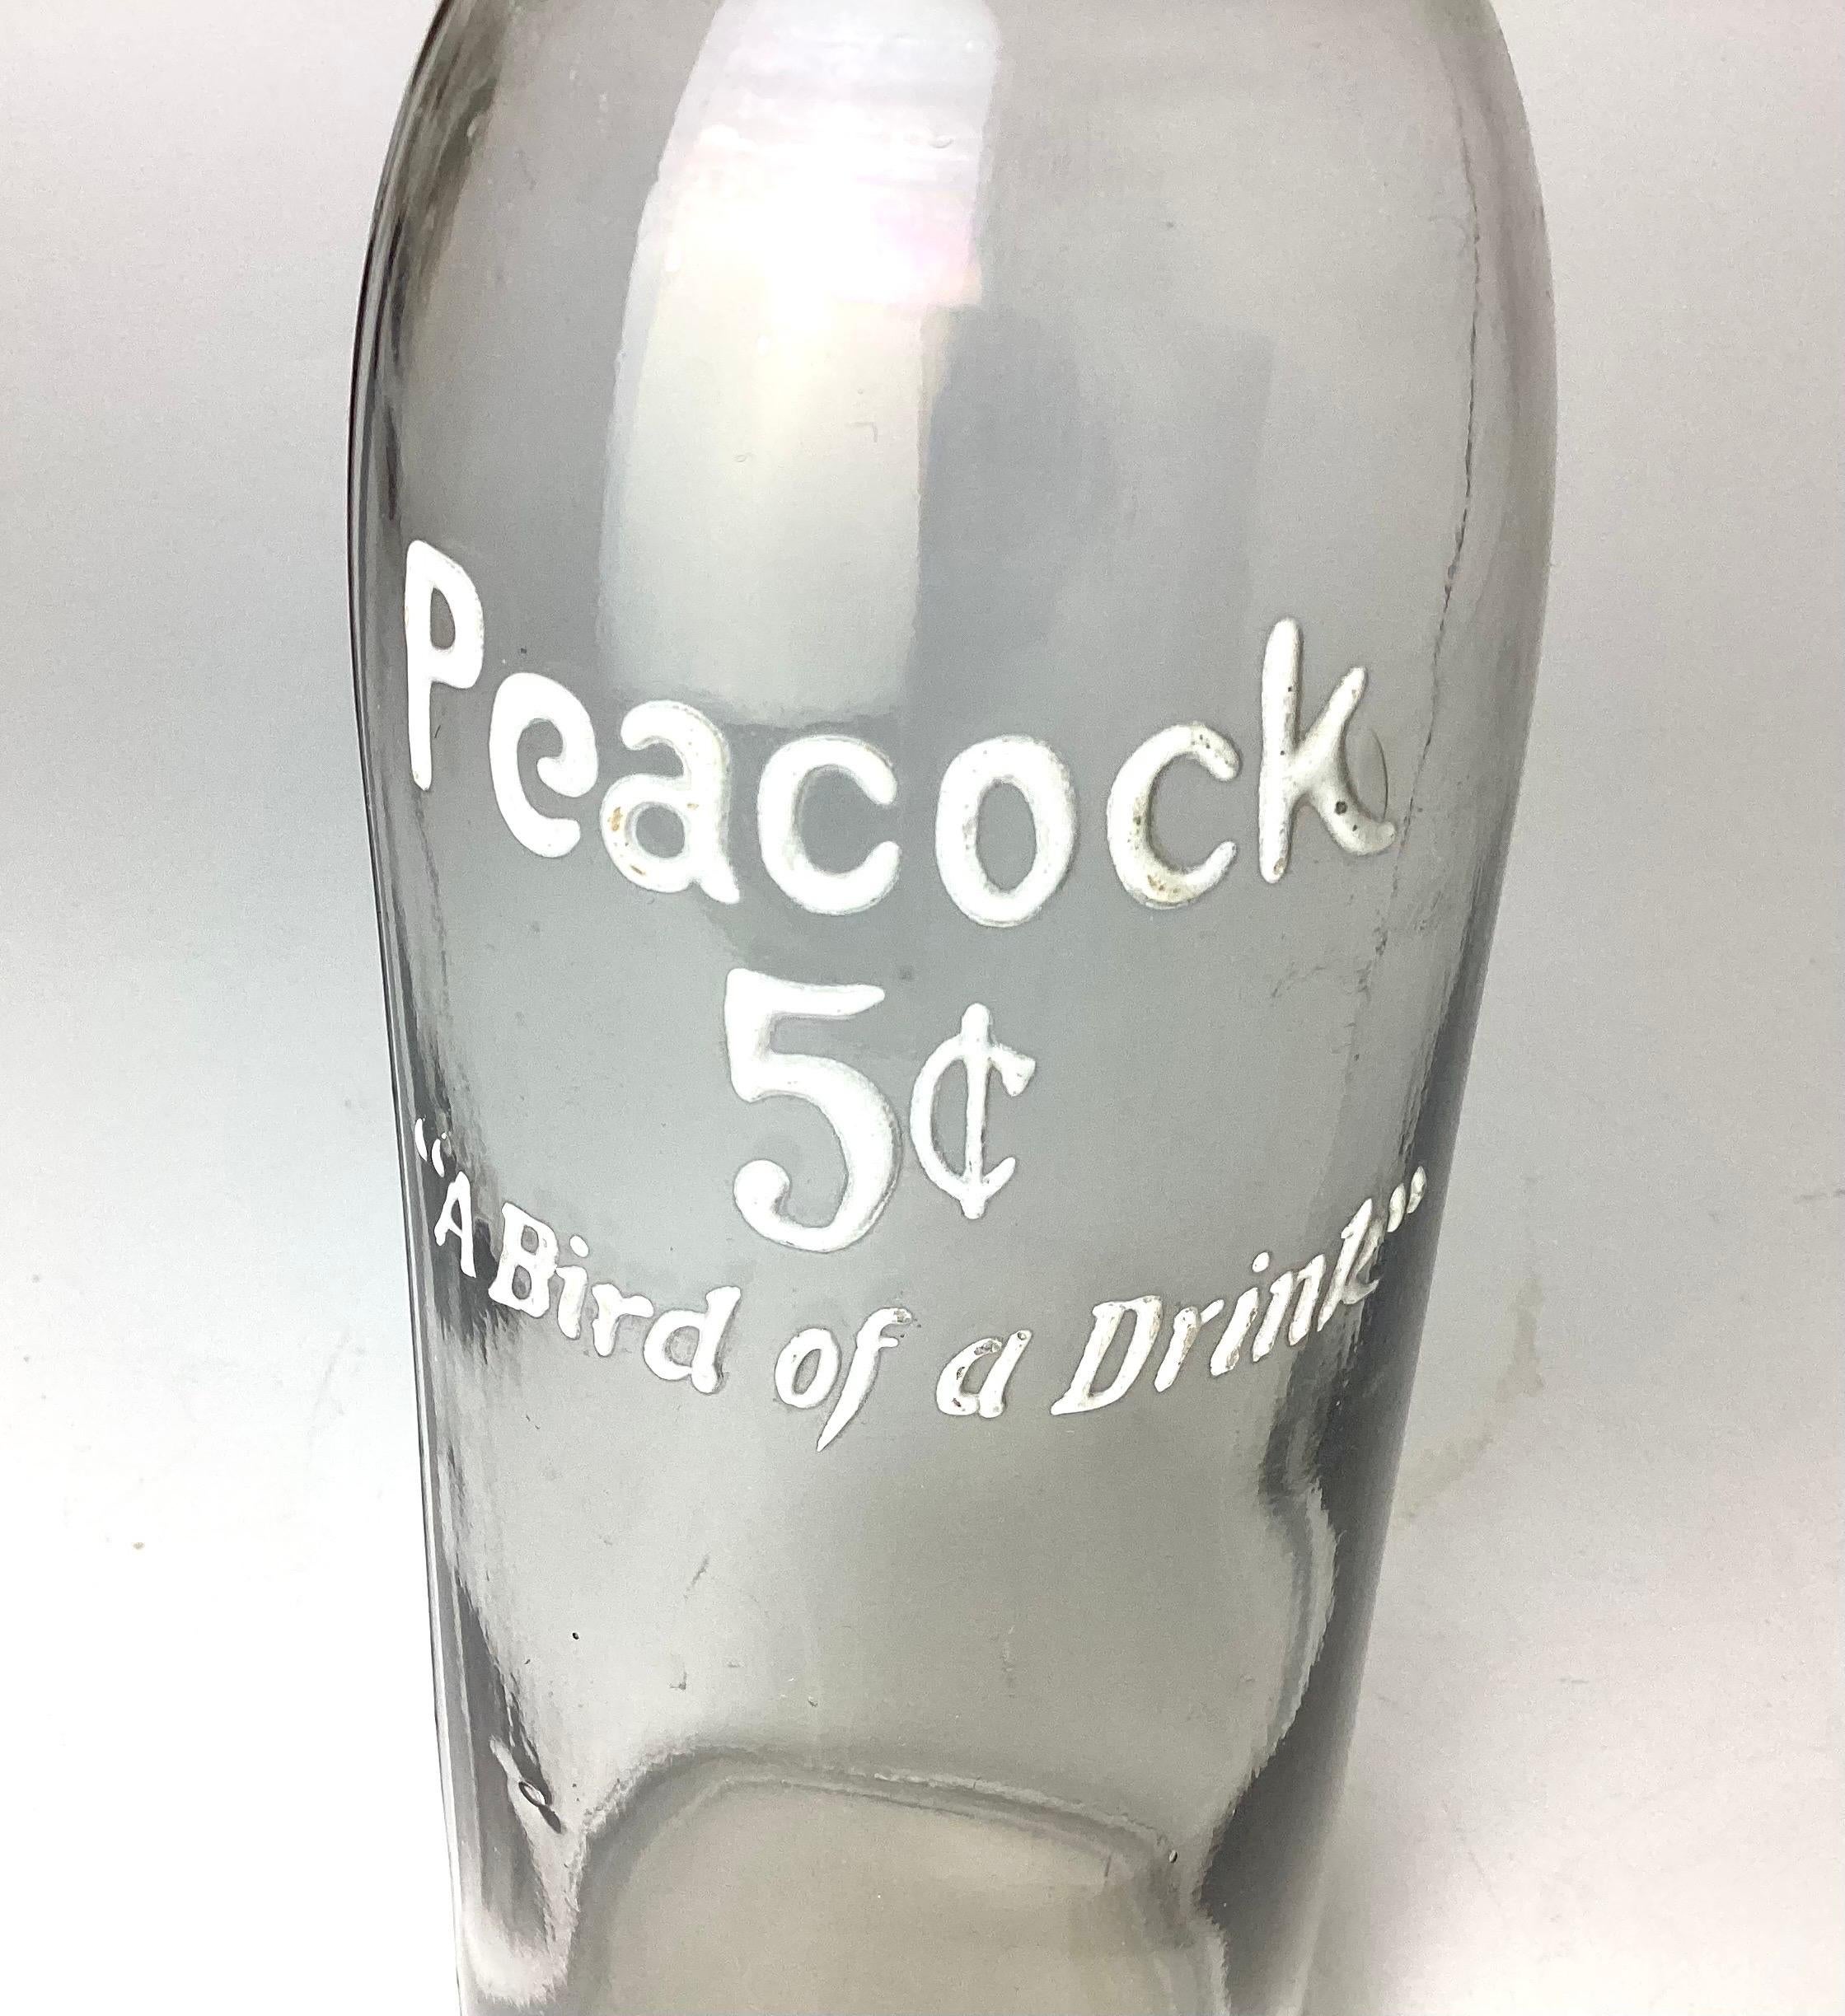 Early and incredibly rear Peacock 5c Soda Fountain Bottle 